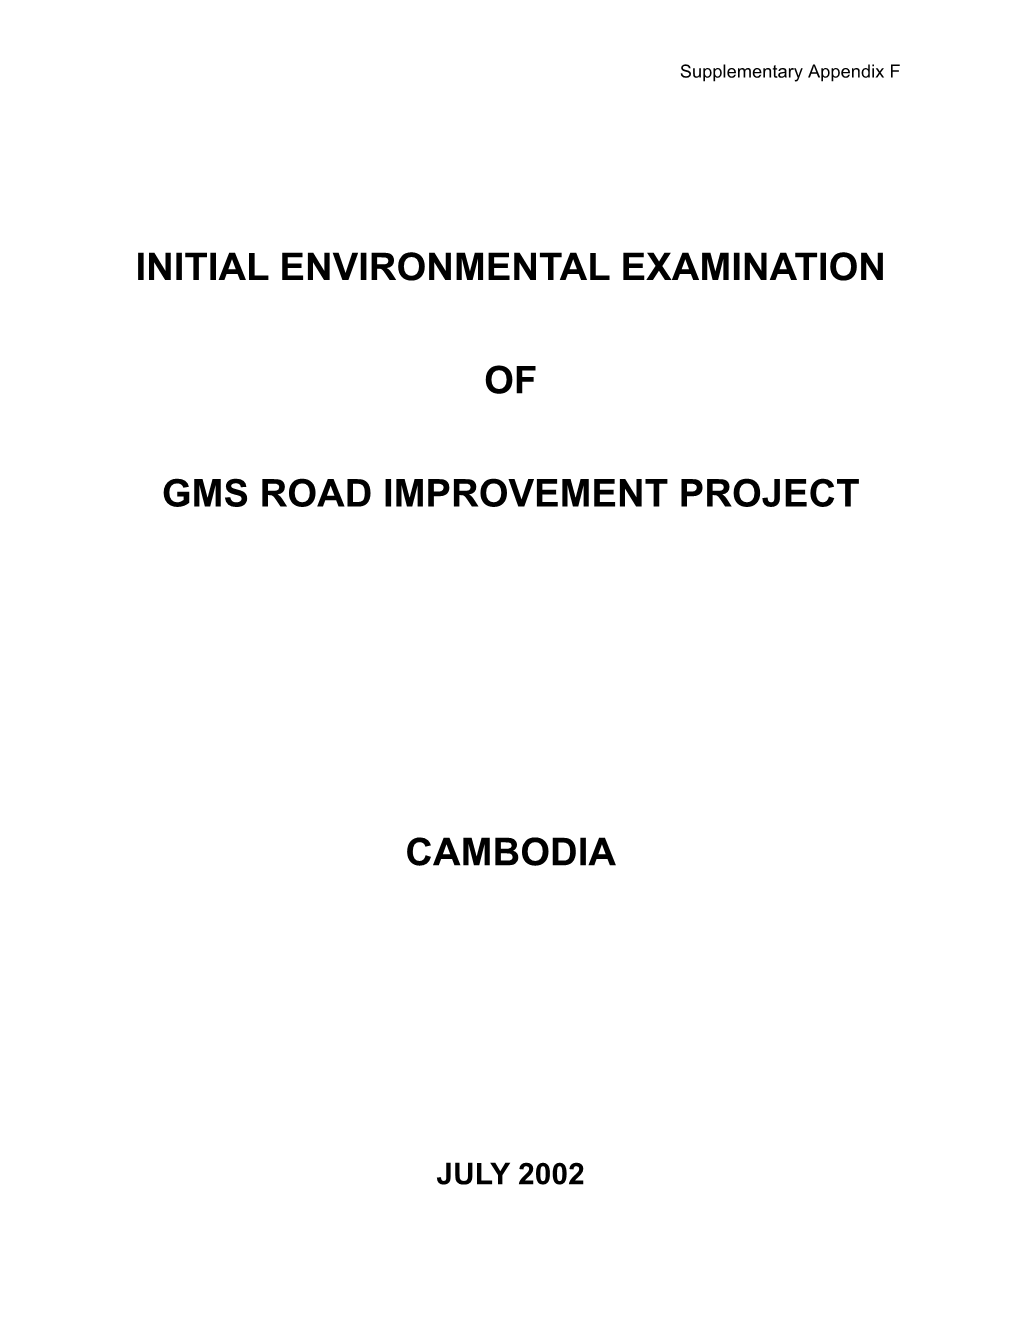 Initial Environmental Examination of GMS Road Improvement Project